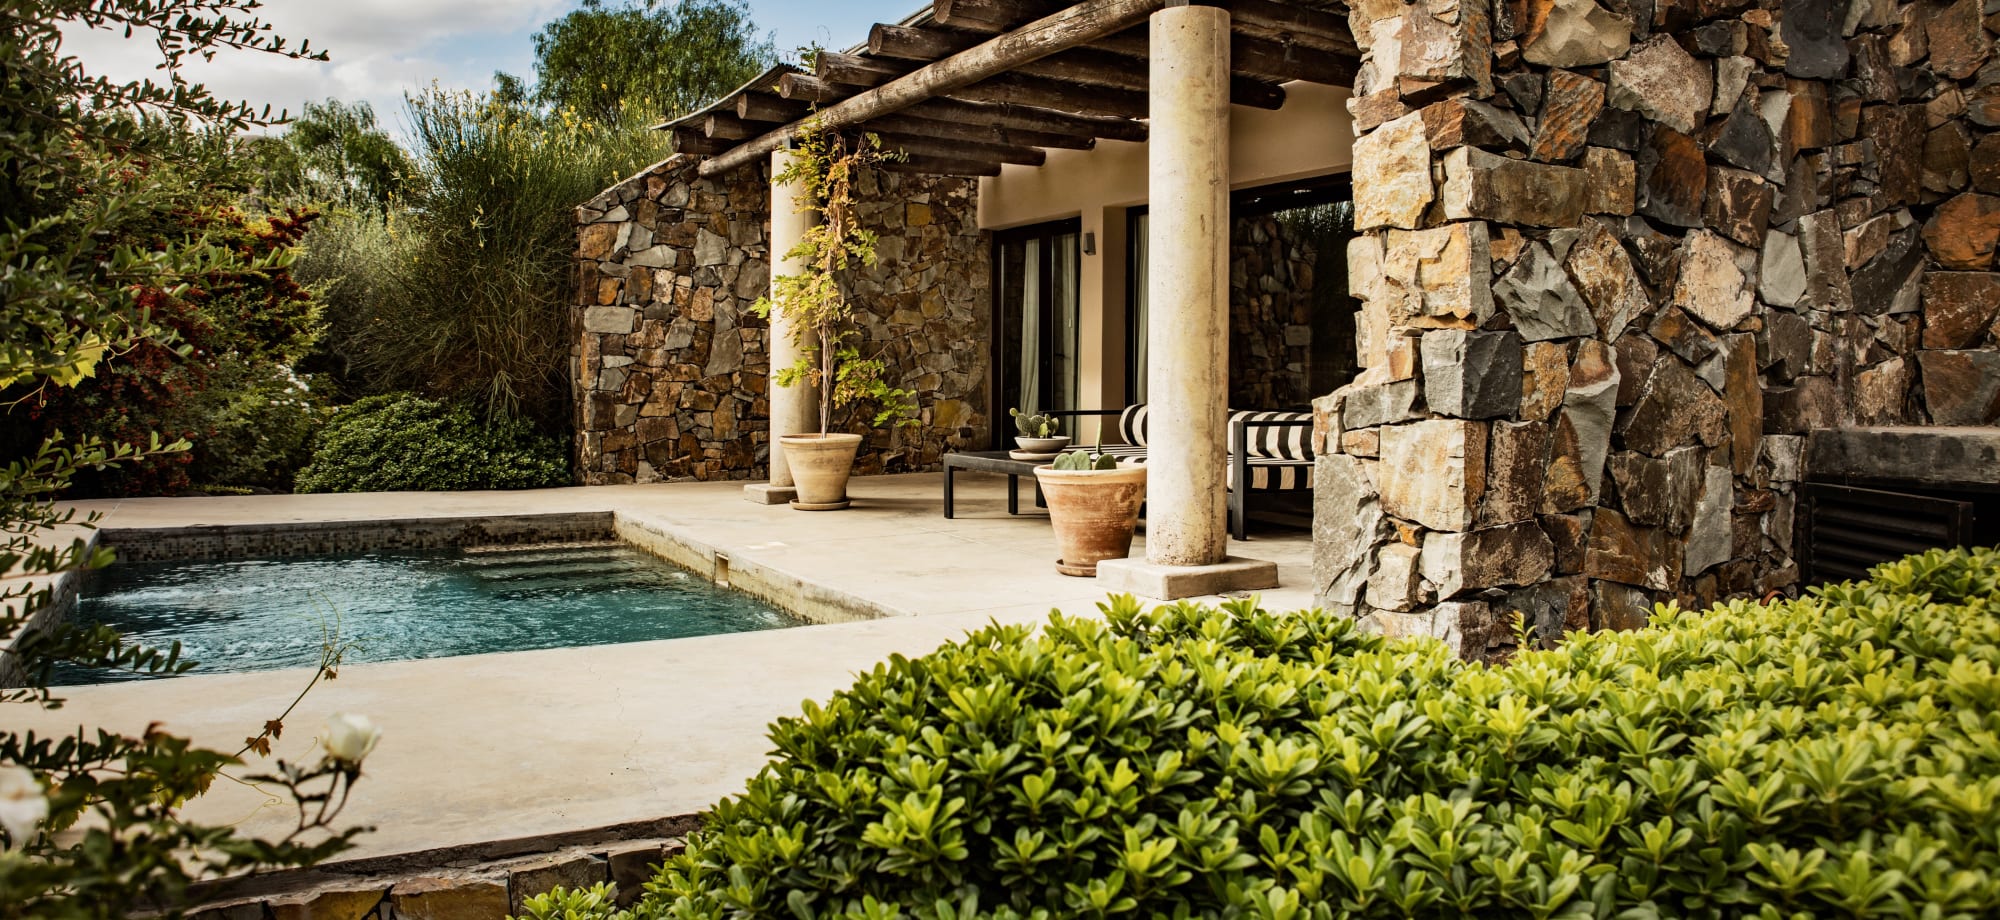 Canvas Wine Lodge Village is a stone building with two outdoor columns overlooking a pool and shrubbery. 